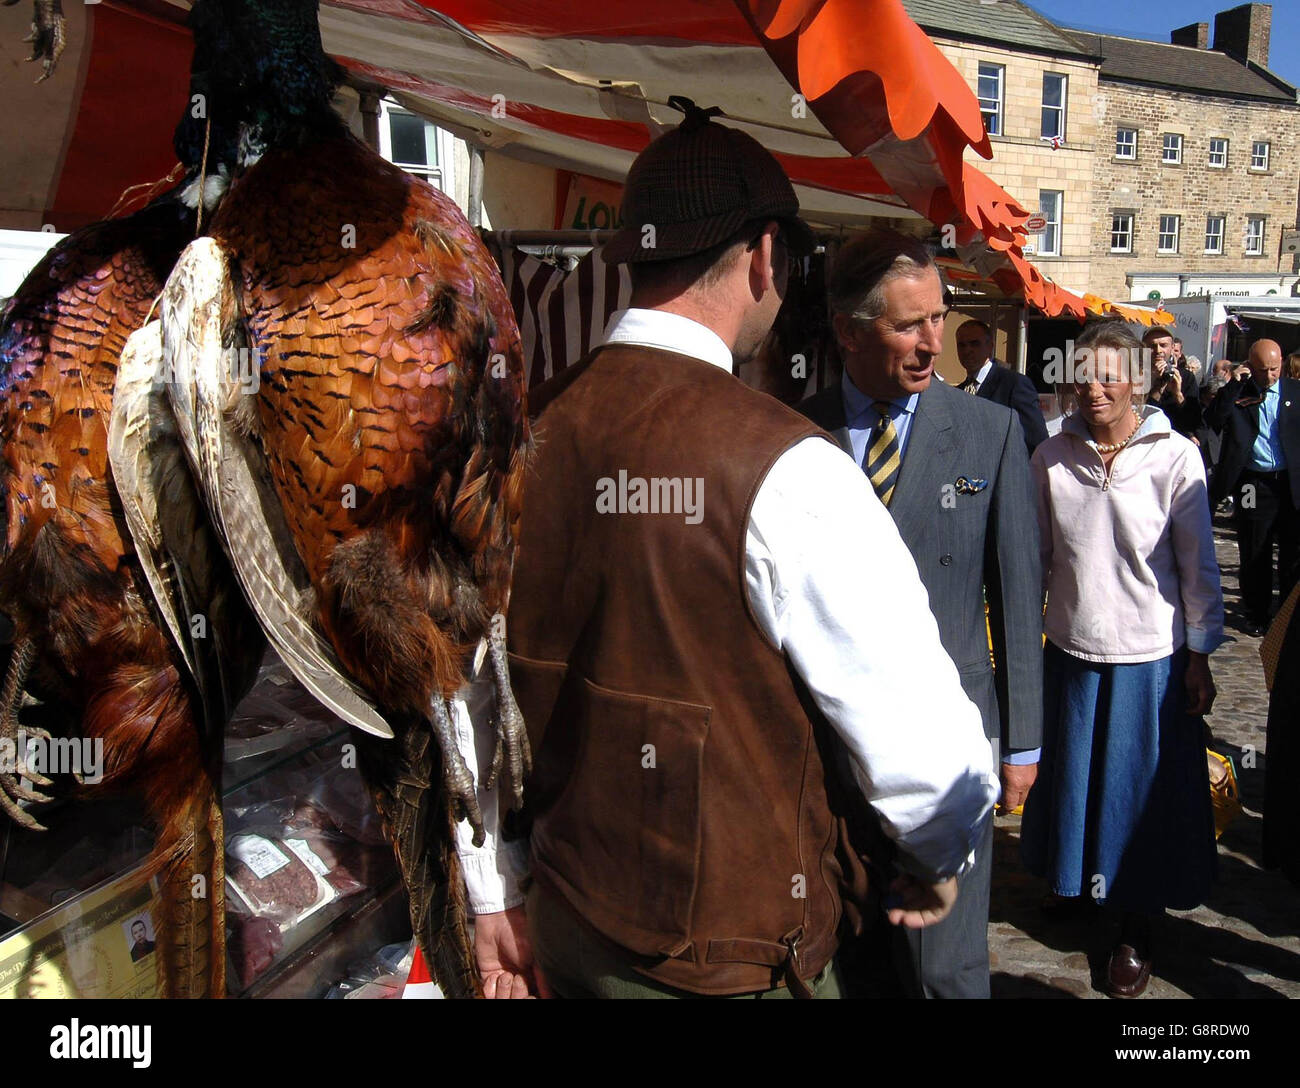 The Prince of Wales visits a game stall in Richmond ,North Yorkshire Market Place, Wednesday, 14th September, 2005.PRESS ASSOCIATION Photo. Photo credit should read: John Giles/PA/WPA Rota Stock Photo